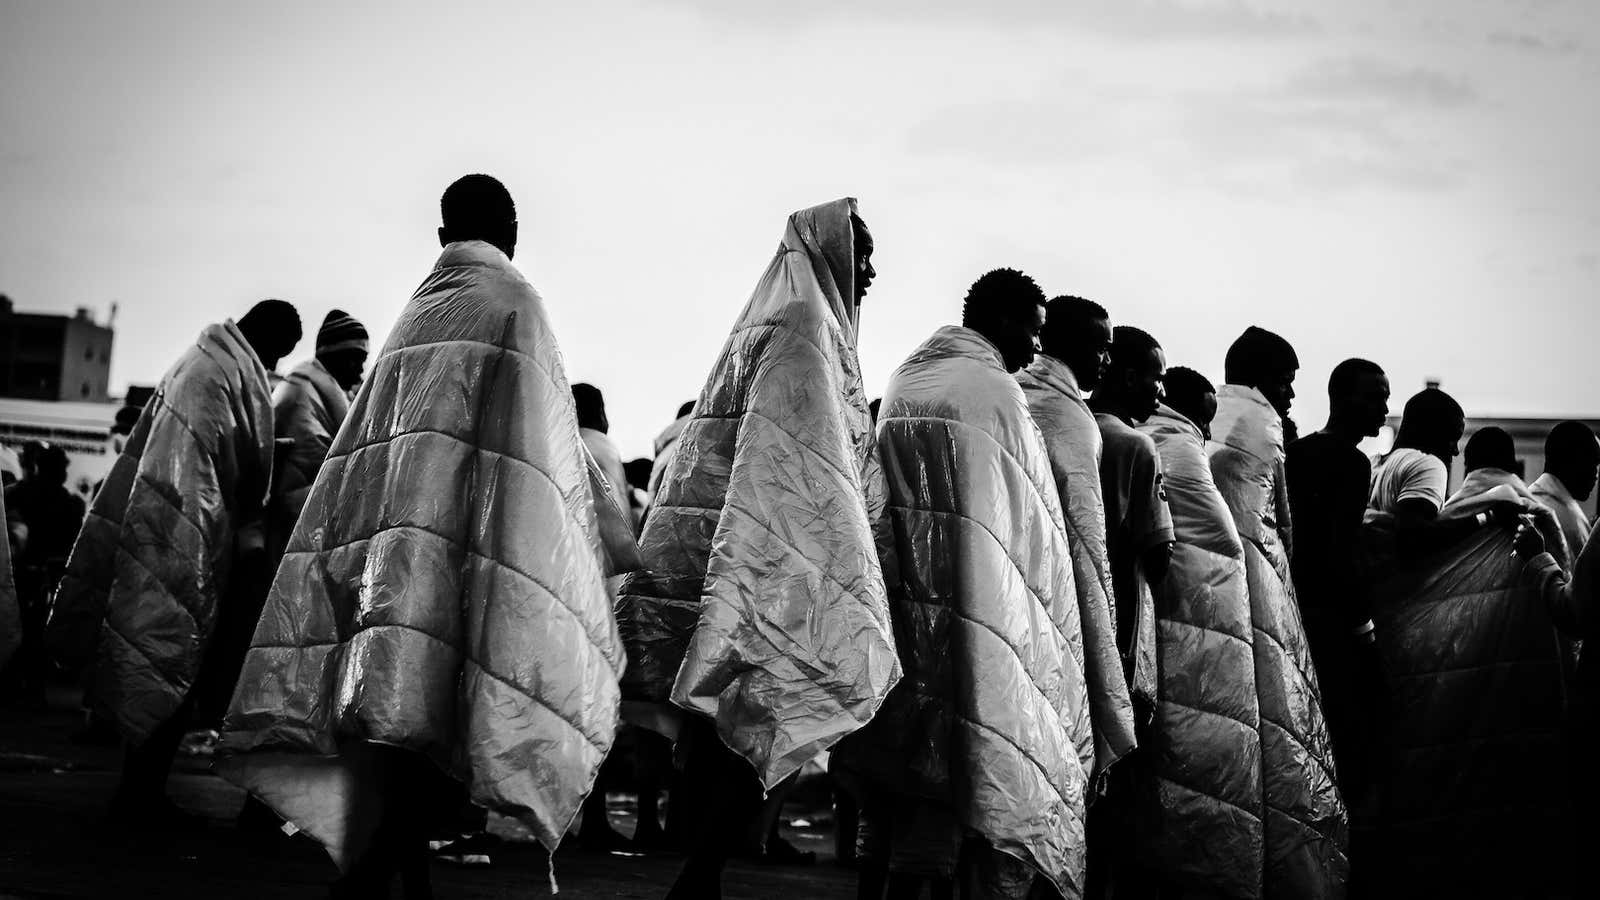 So far in 2016, 2,510 people have tried trying to cross the Mediterranean from Africa.